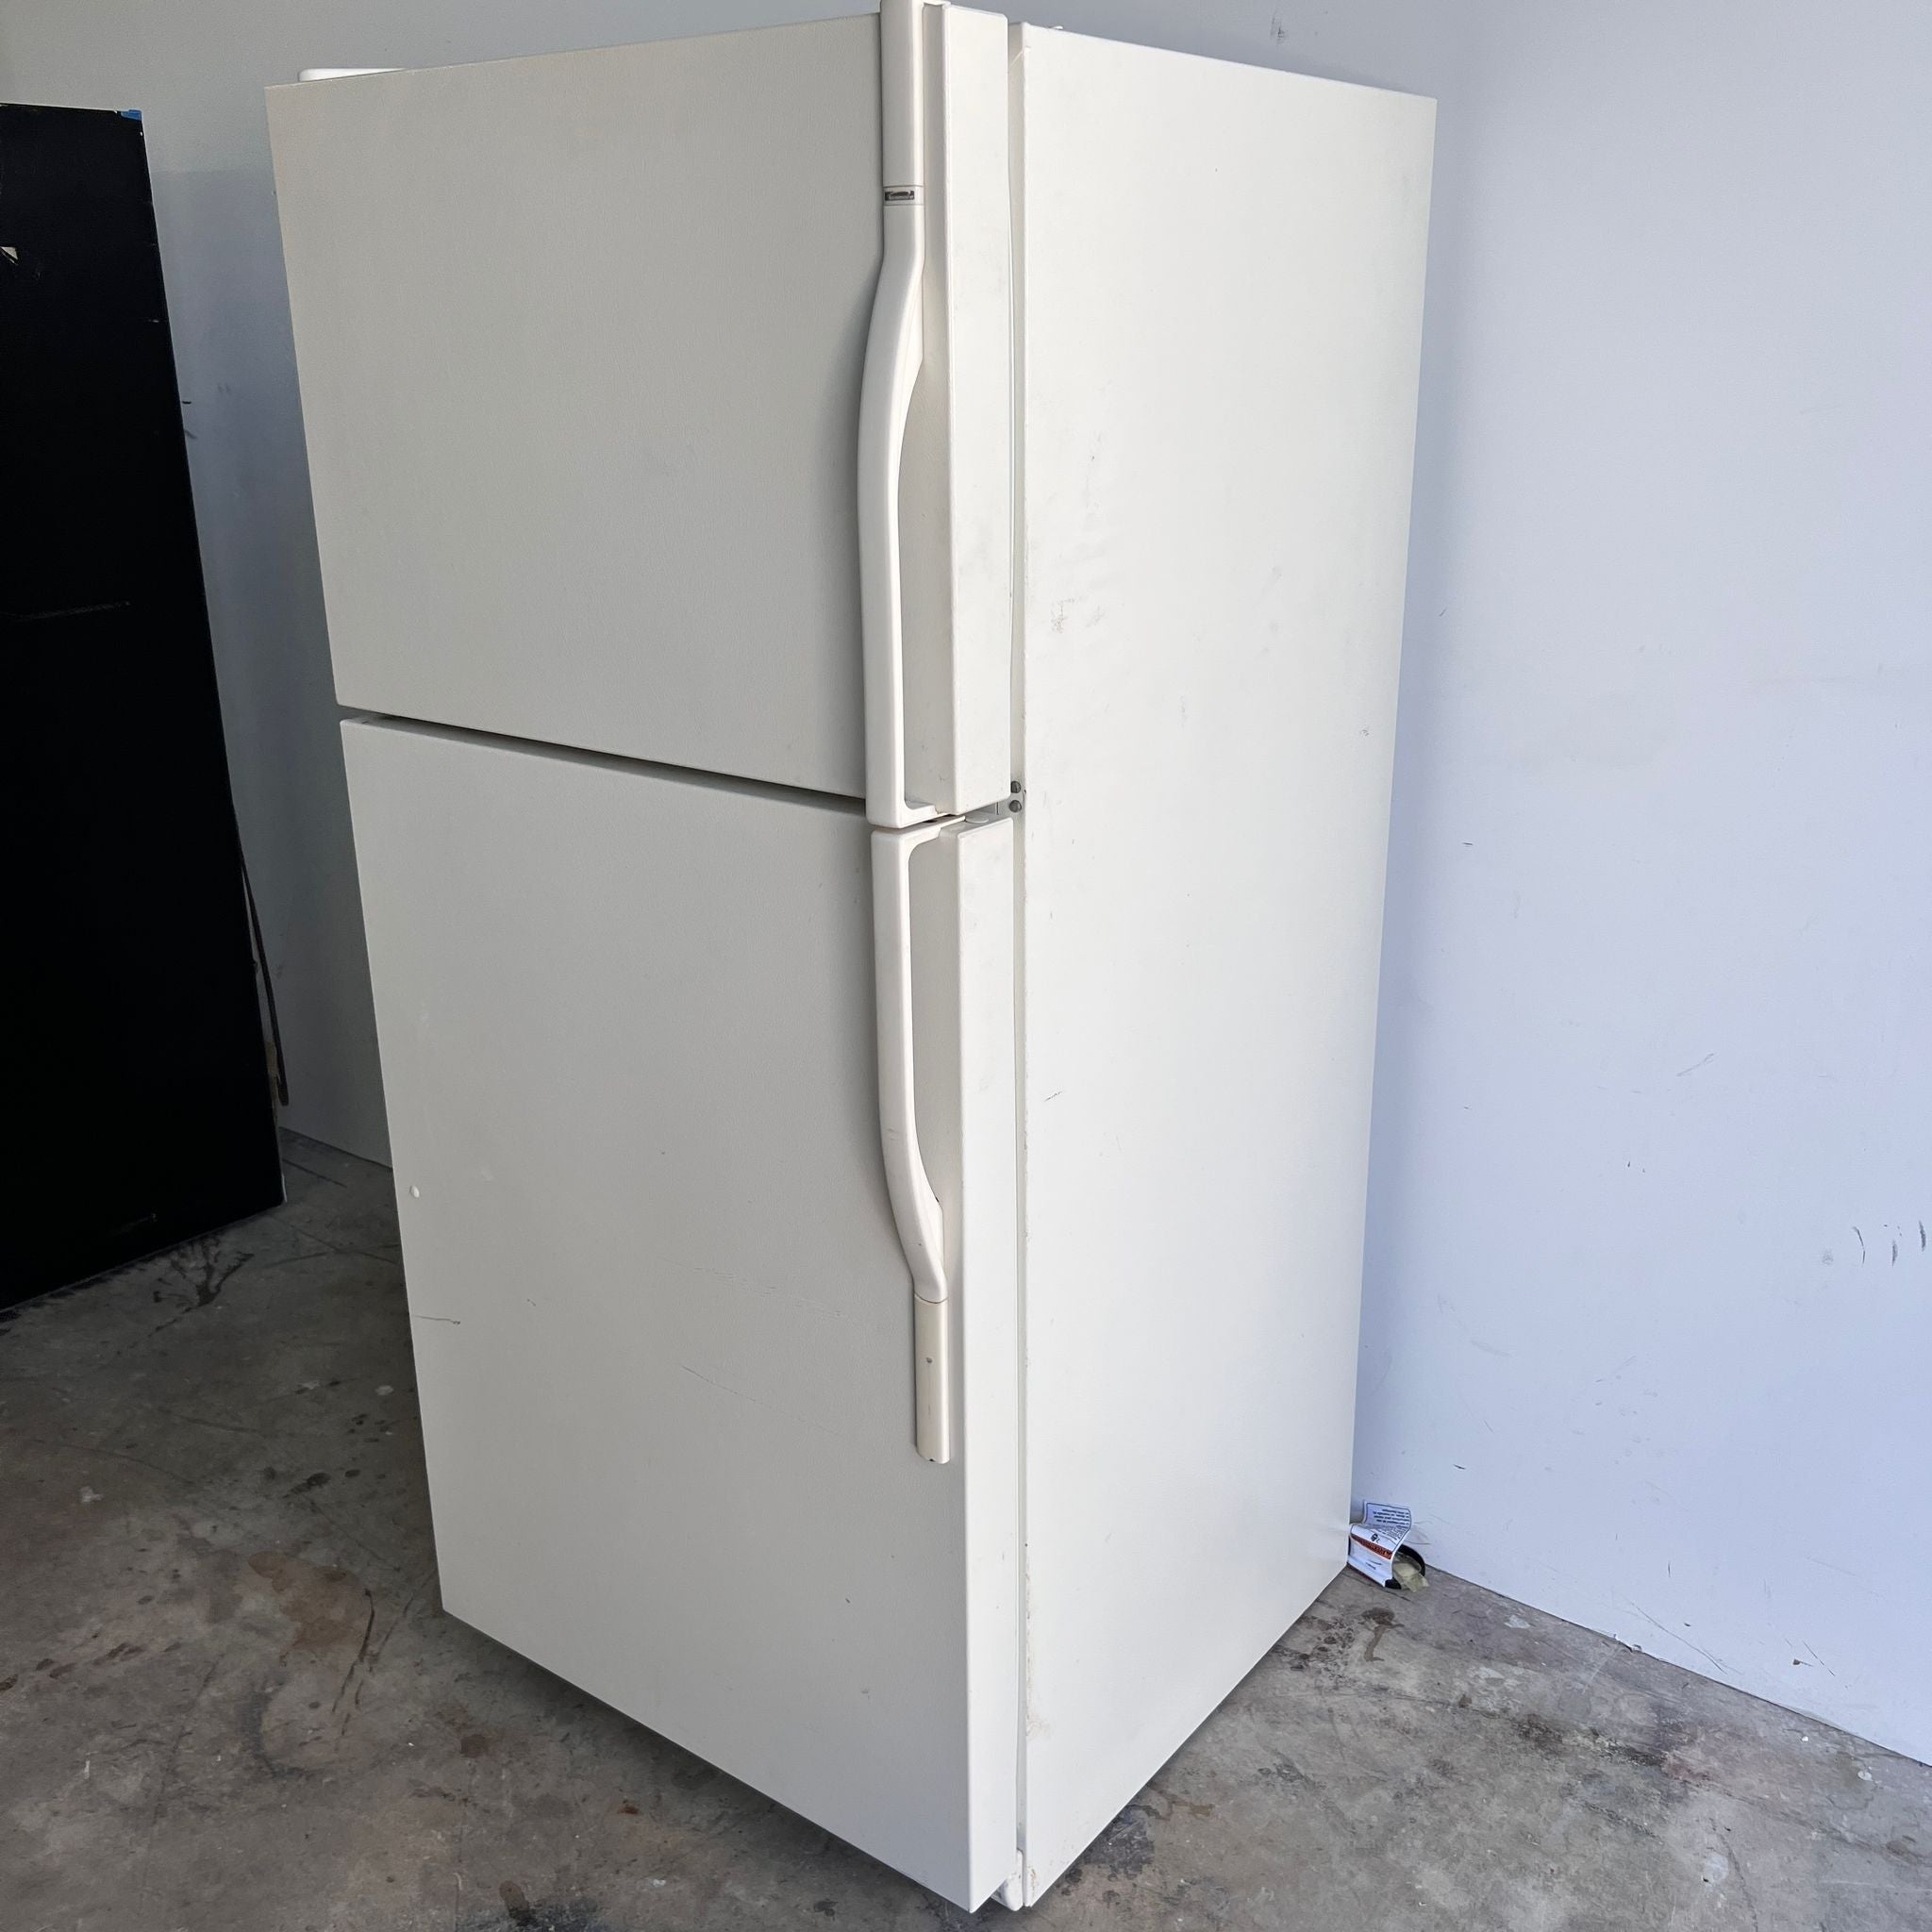 Kenmore Top and Bottom Refrigerator with Ice maker